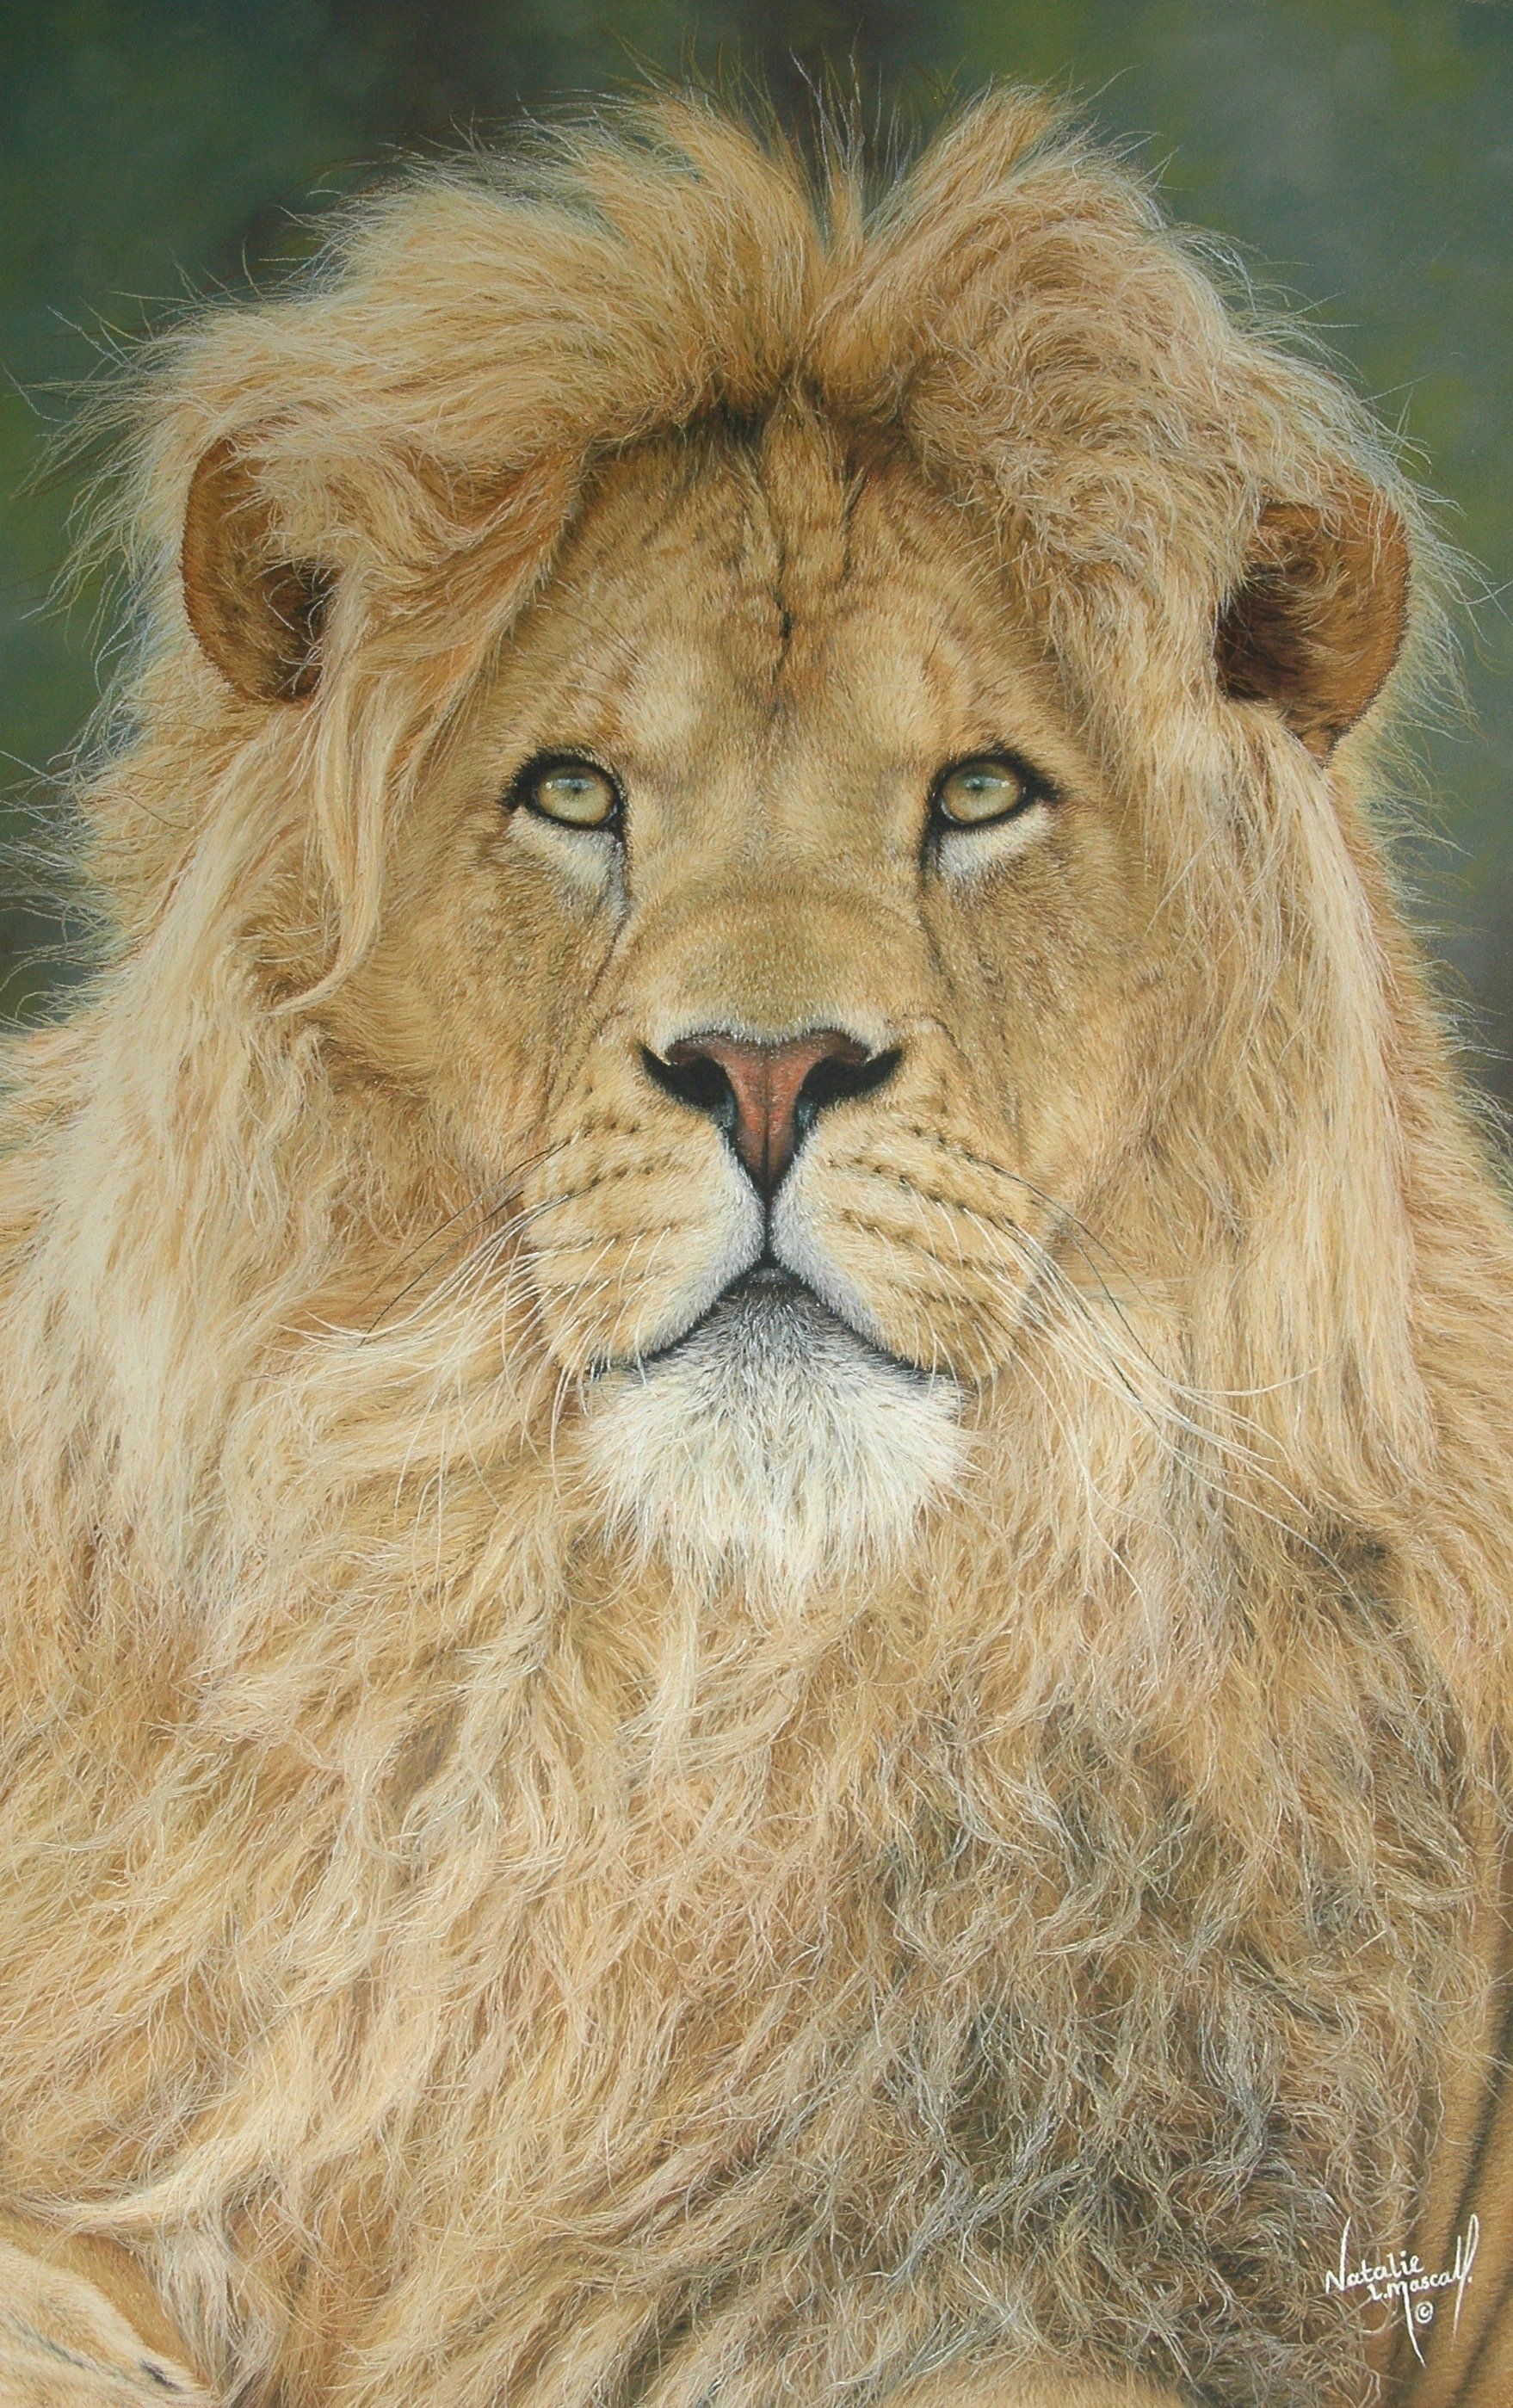 A commission of a lion drawn by Natalie Mascall, award winning wildlife artist. Pastel artist. A lion drawn in pastel by Natalie Mascall.